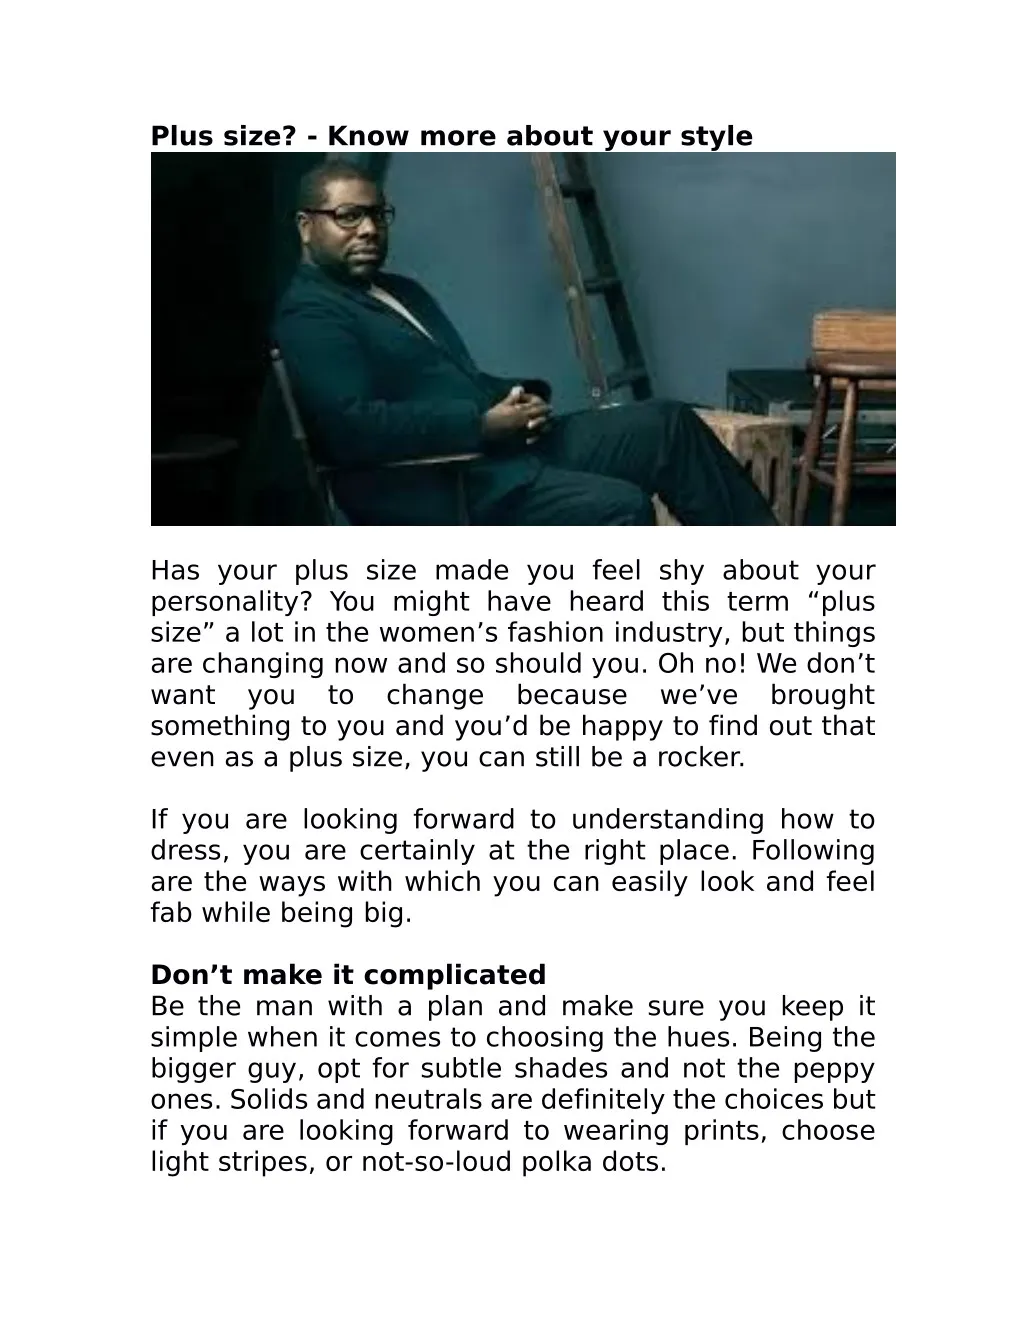 plus size know more about your style